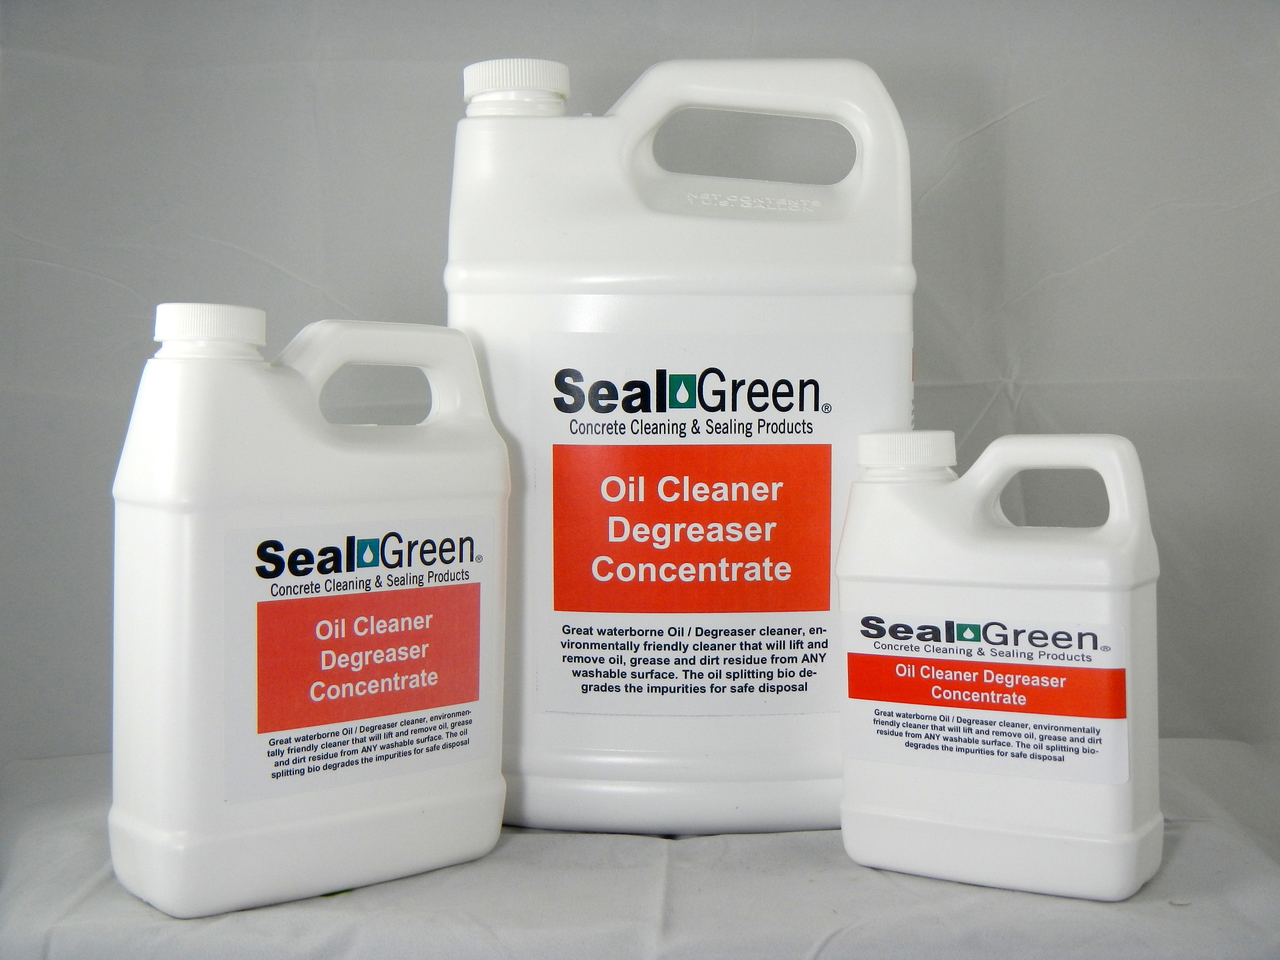 Oil Cleaner Degreaser Concentrate Questions & Answers